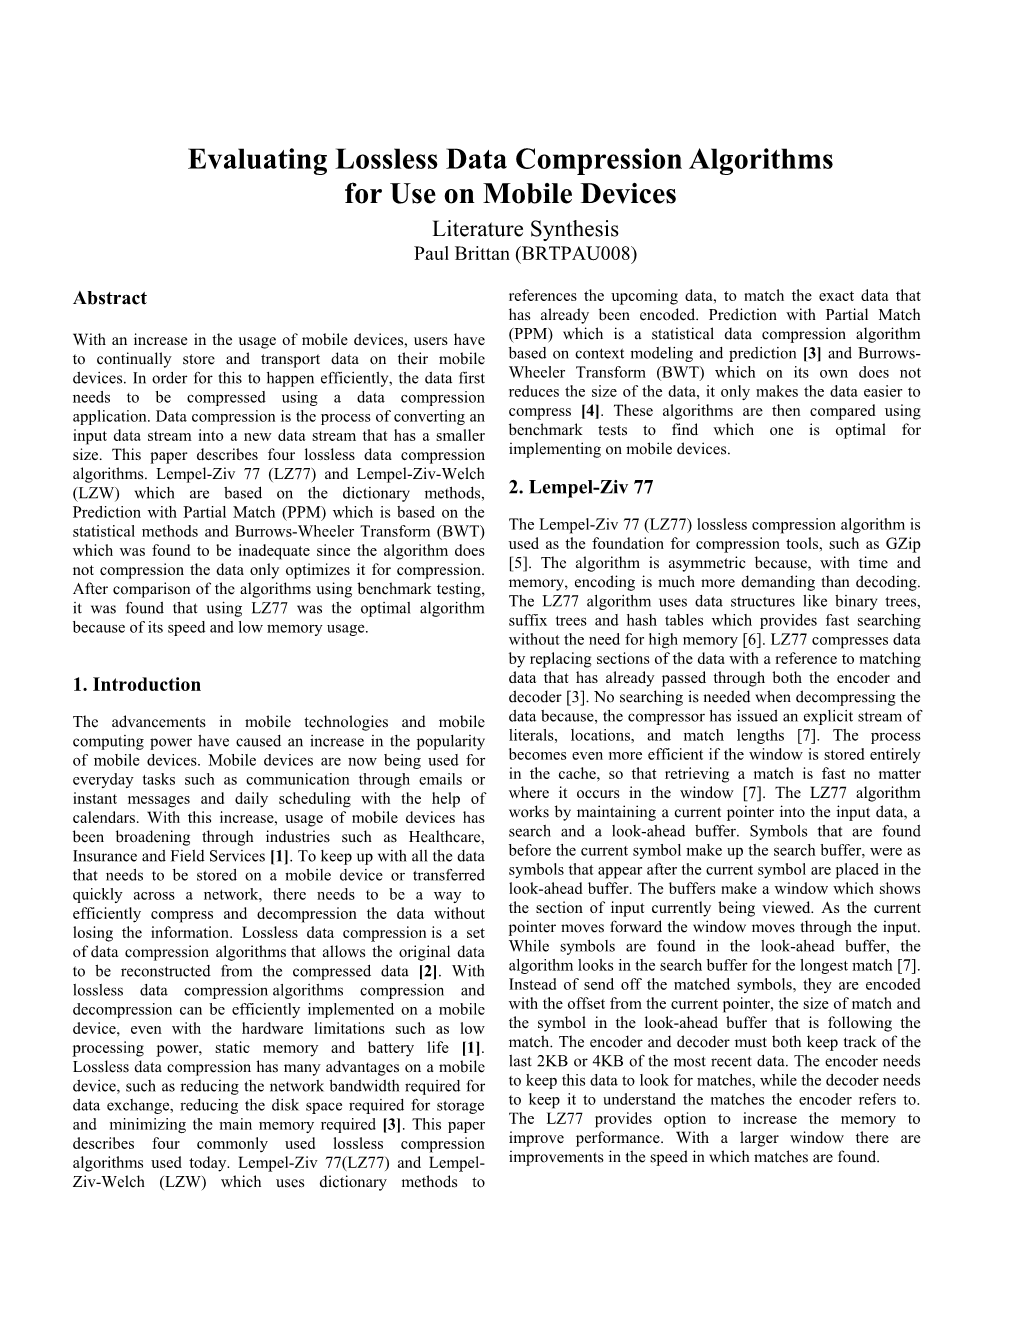 Evaluating Lossless Data Compression Algorithms for Use on Mobile Devices Literature Synthesis Paul Brittan (BRTPAU008)